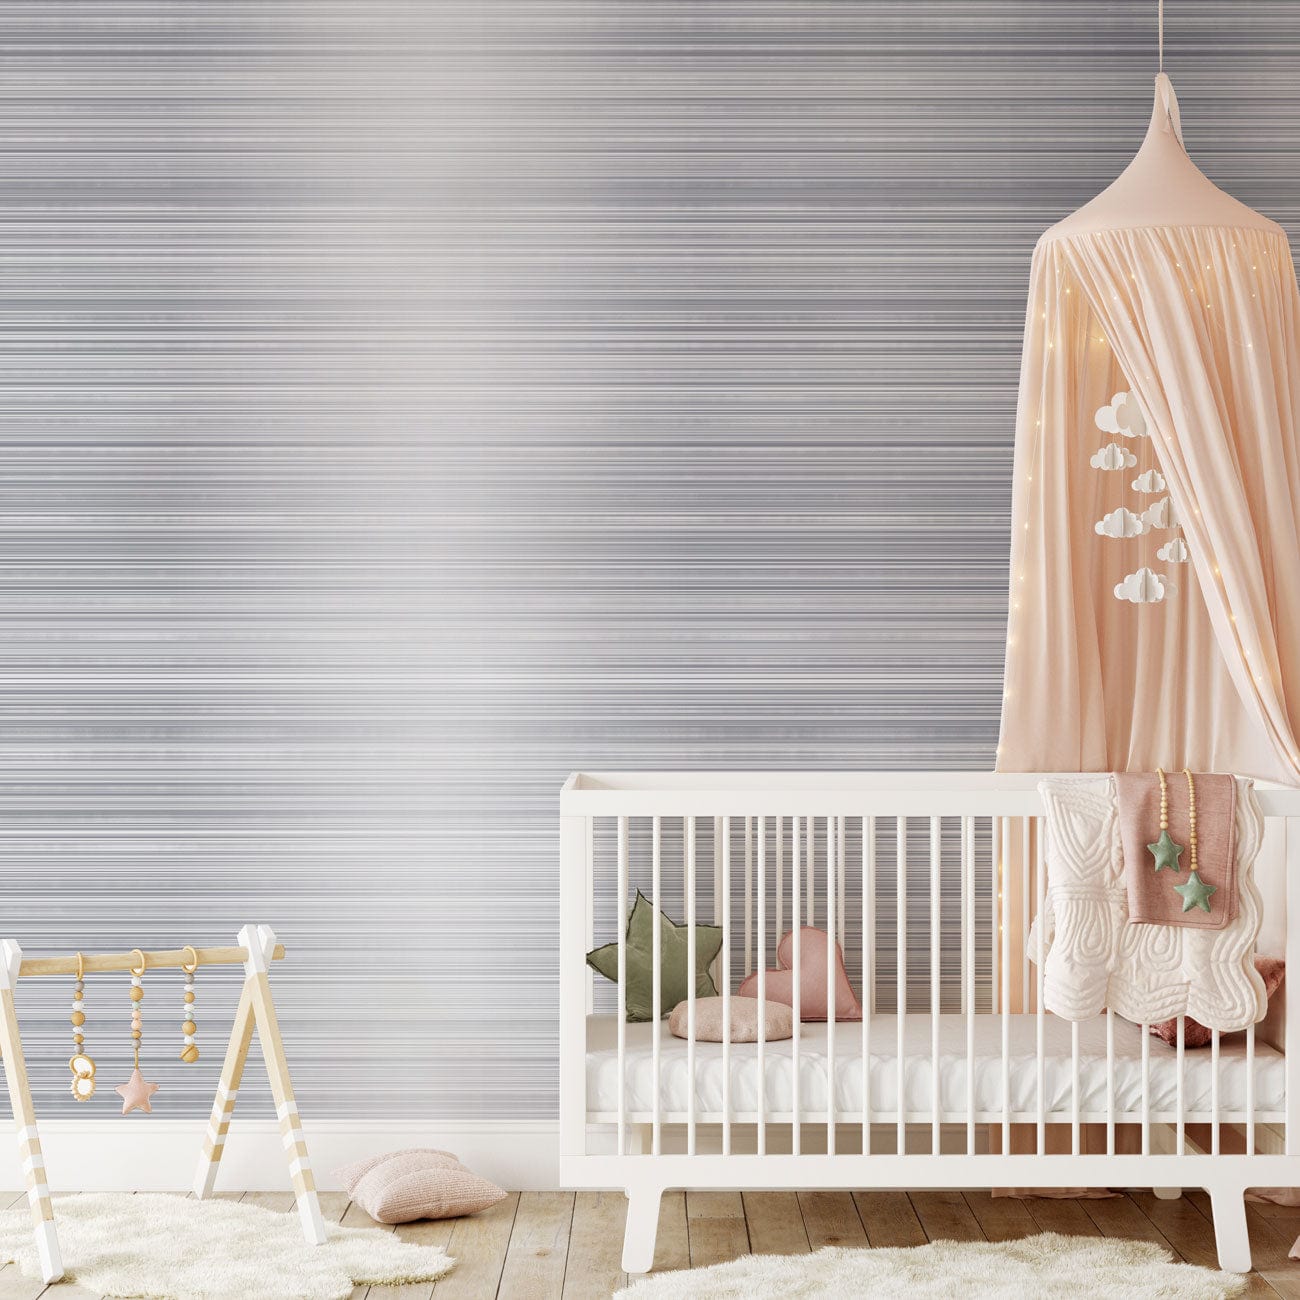 Wallpaper mural with brushed silver metals design for use in nurseries.